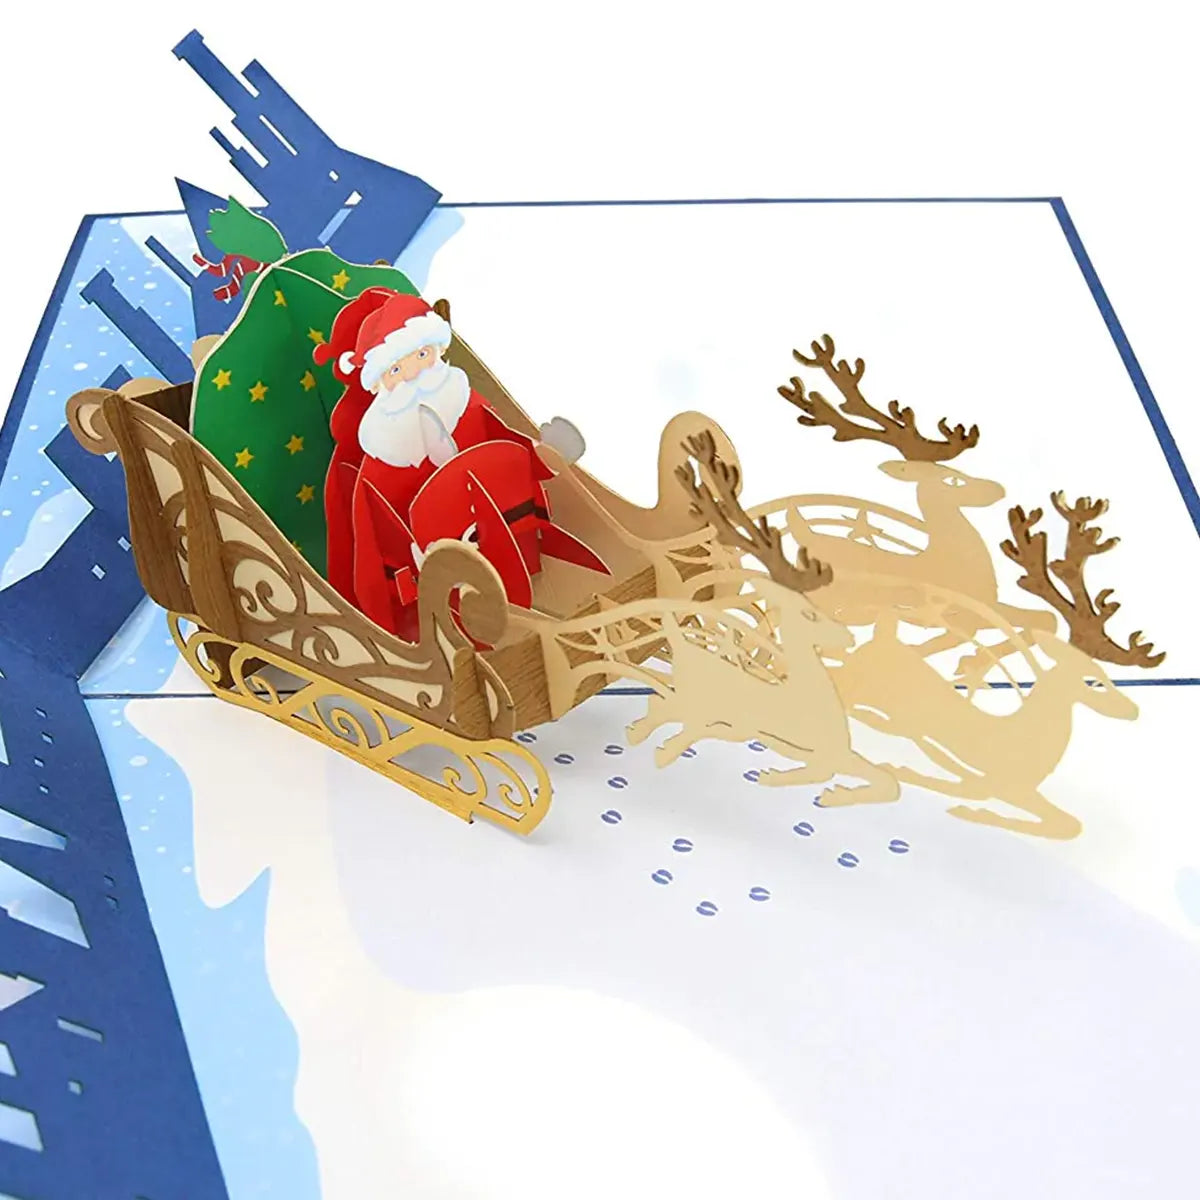 The Santa's Sleigh and Reindeer pop-up card is perfect for the holiday season